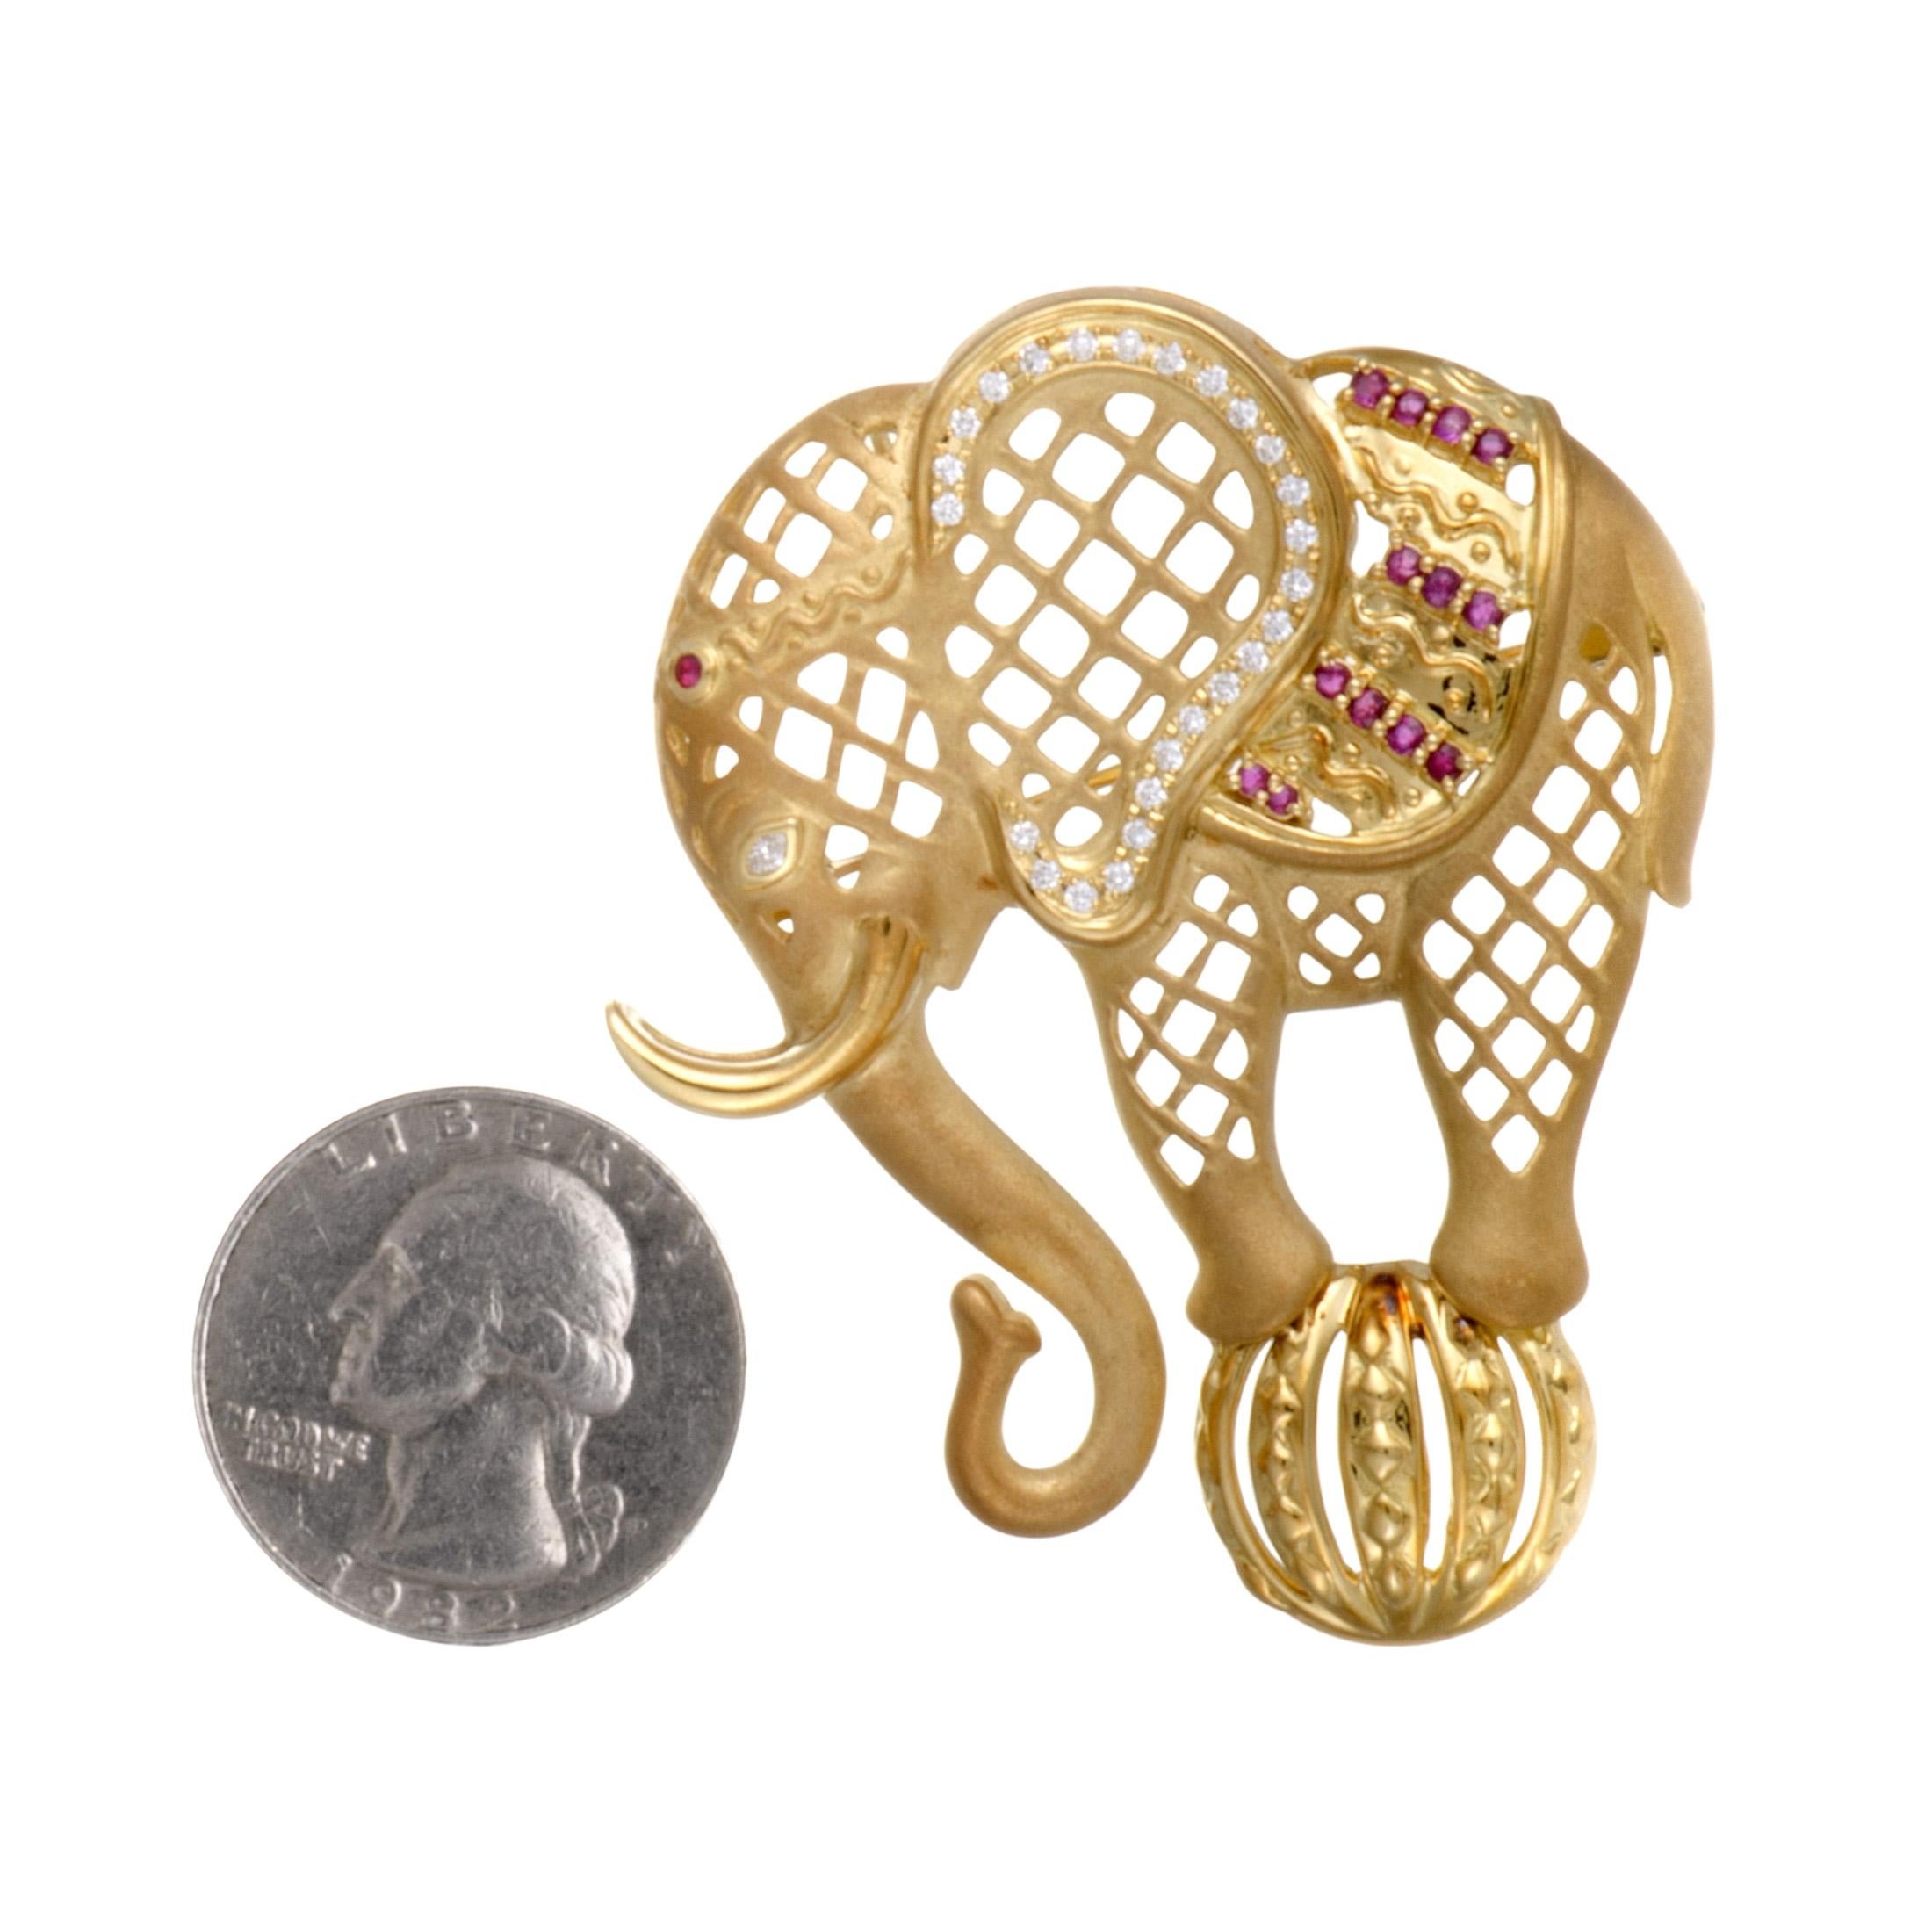 Taking the form of an elephant in a splendidly lustrous fashion, this exceptional 18K yellow gold brooch boasts an incredibly attractive appeal. The brooch is set with diamonds that weigh 0.41 carats in total and with rubies that amount to 0.29